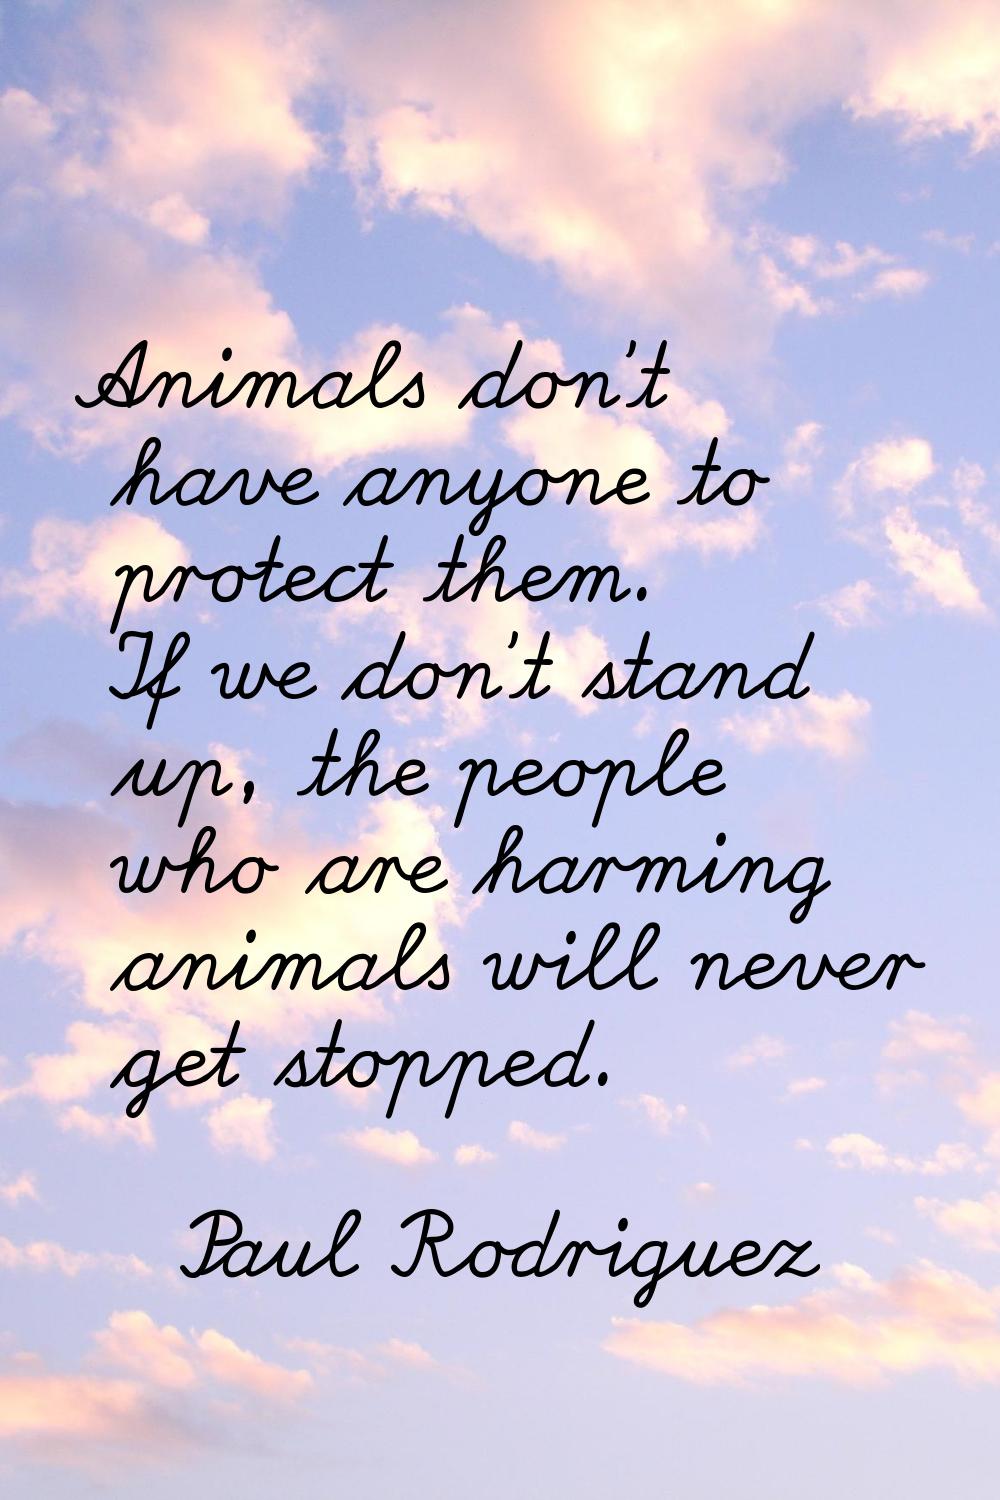 Animals don't have anyone to protect them. If we don't stand up, the people who are harming animals